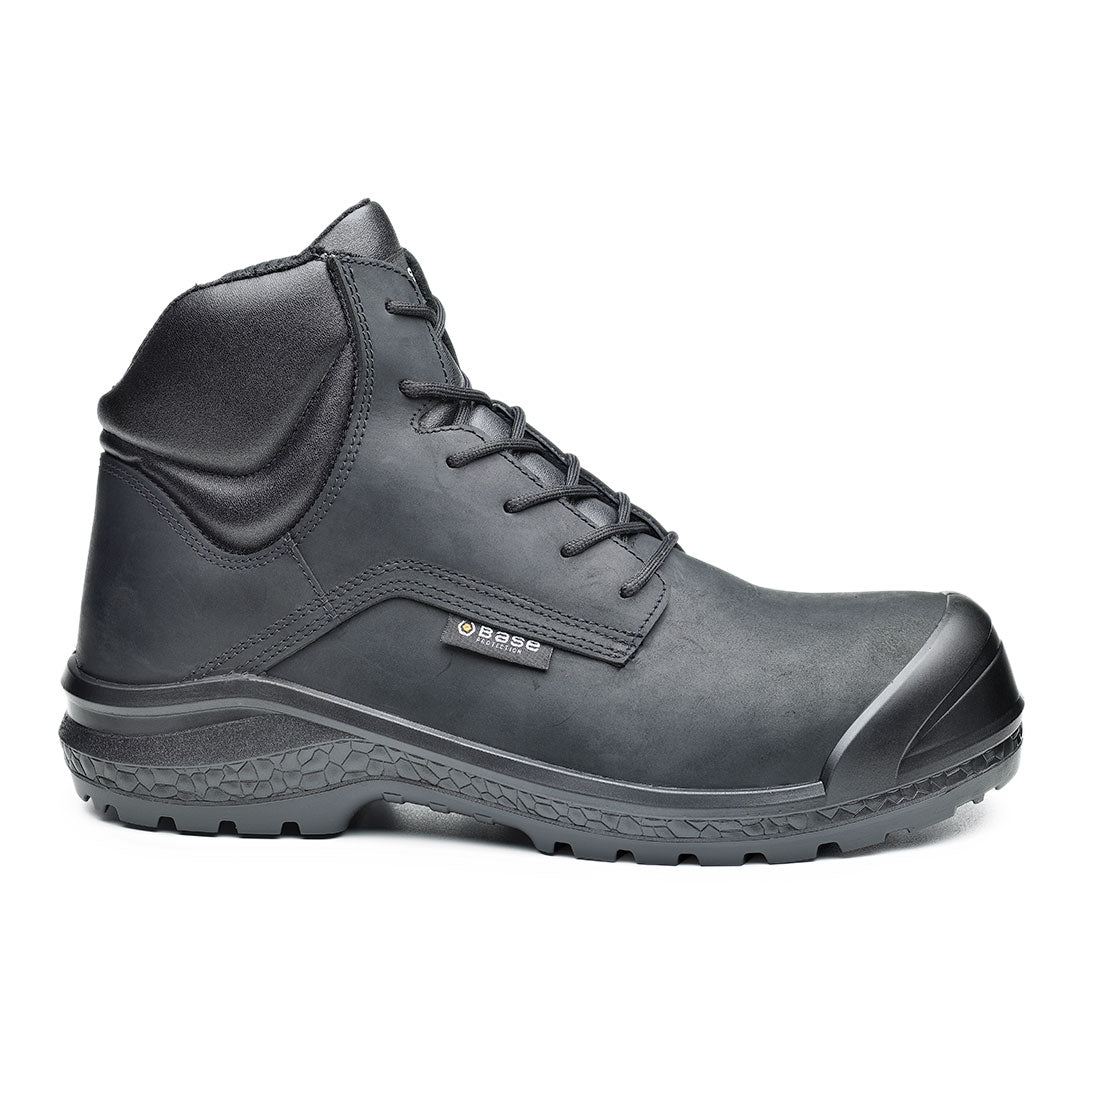 Portwest B0883 Be-Browny/Be Jetty Top Base Safety Boot (S3) (6539365908534)